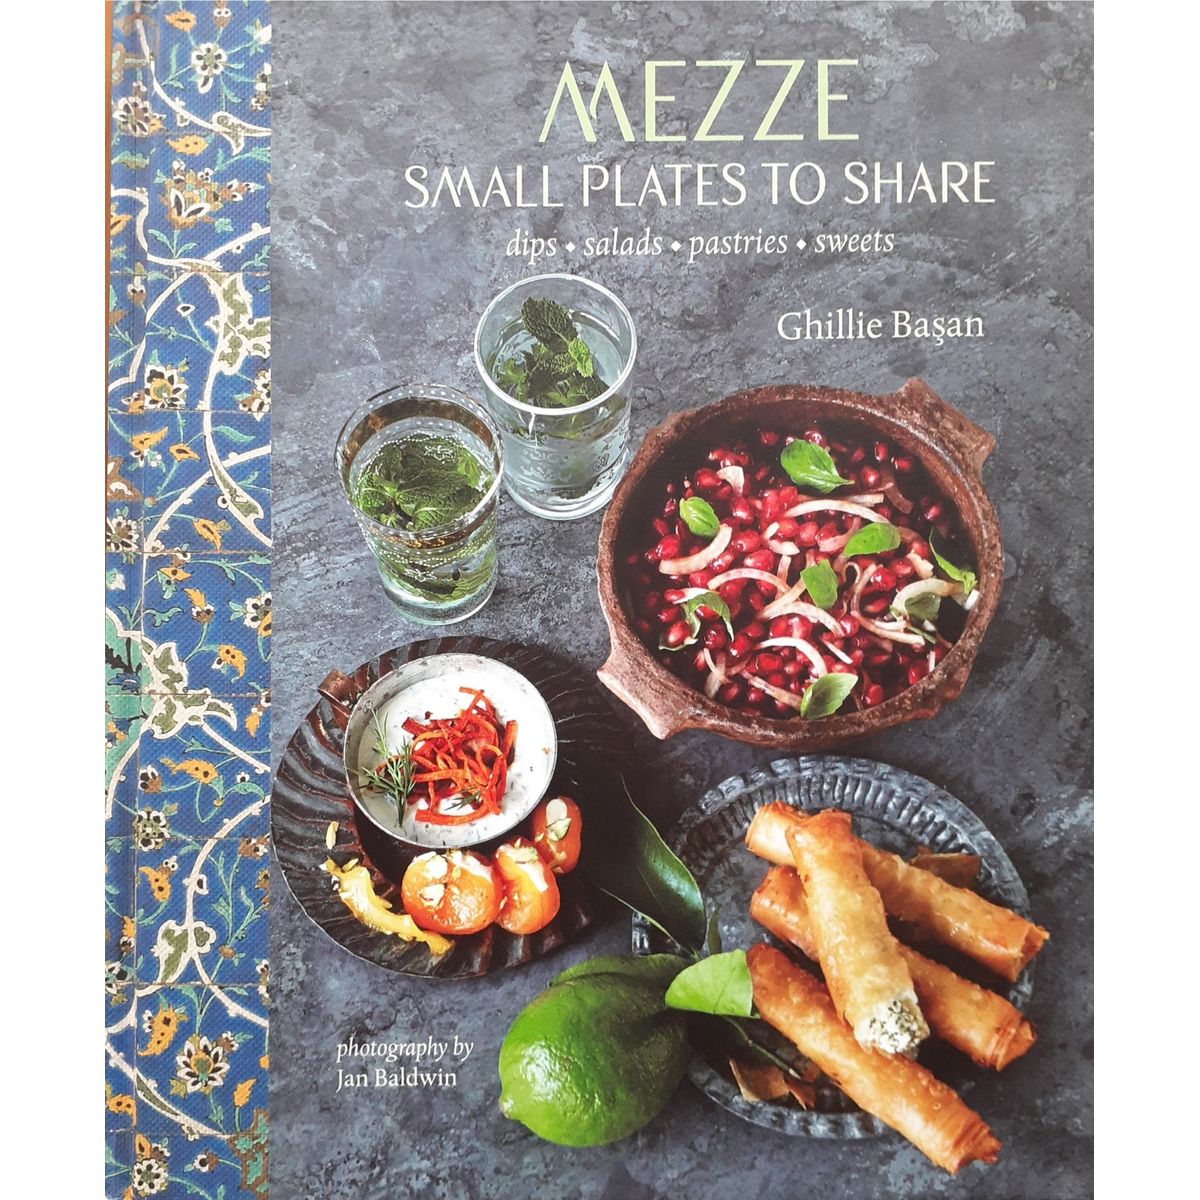 ISBN: 9781849756518 / 1849756511 - Mezze: Small Plates to Share by Ghillie Basan [2015]